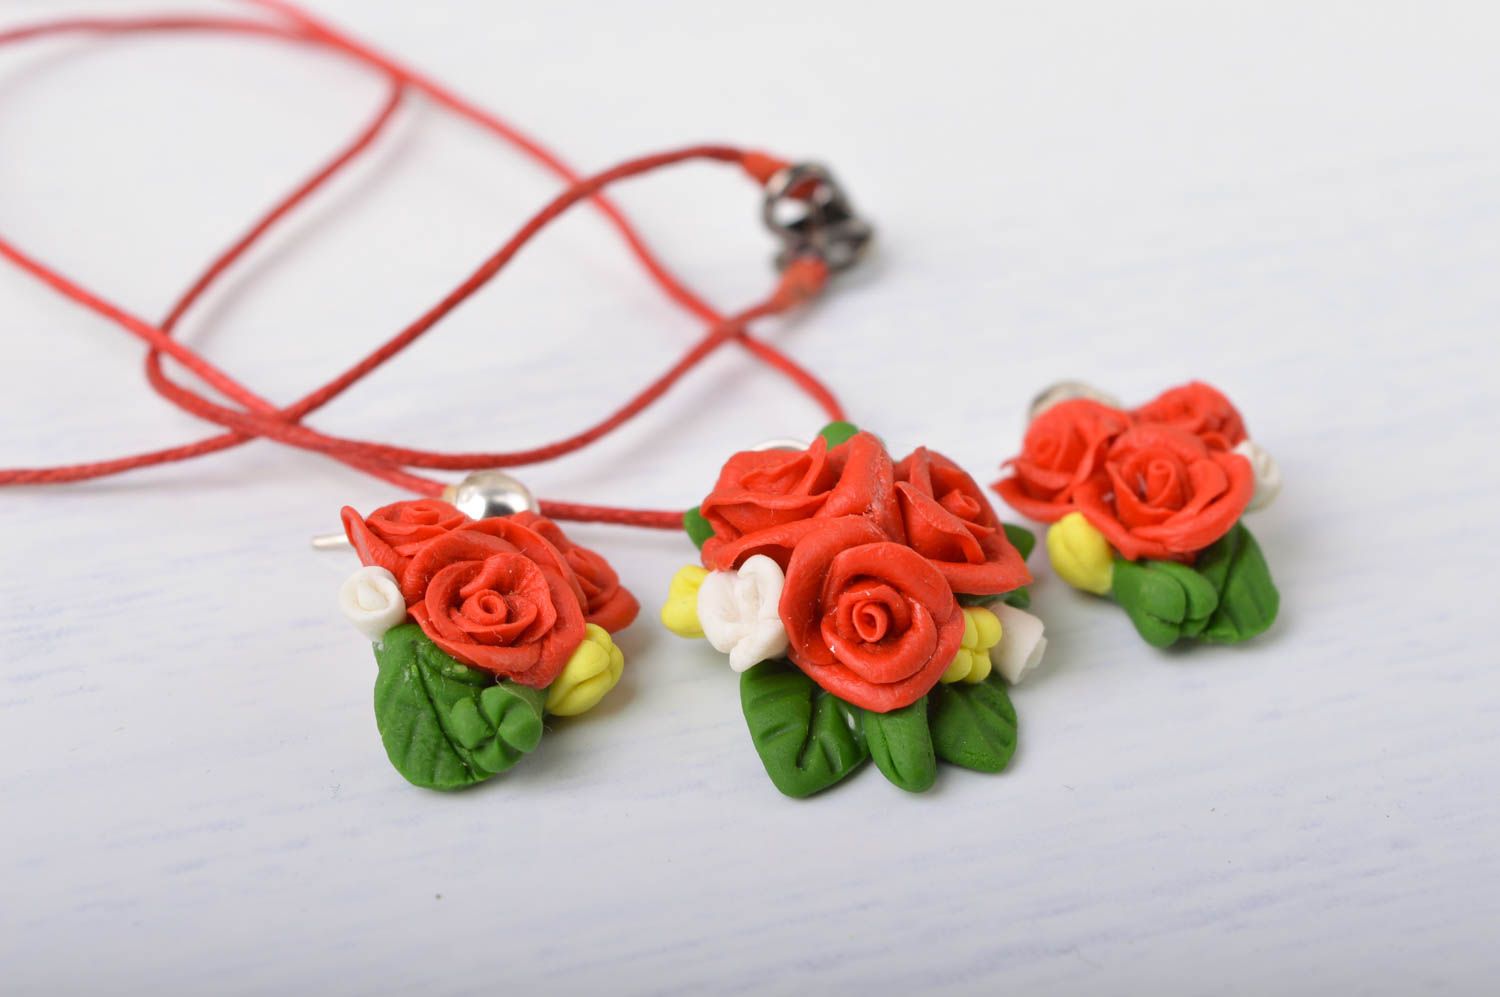 Handmade jewelry set earrings and pendant made of cold porcelain with flowers photo 1